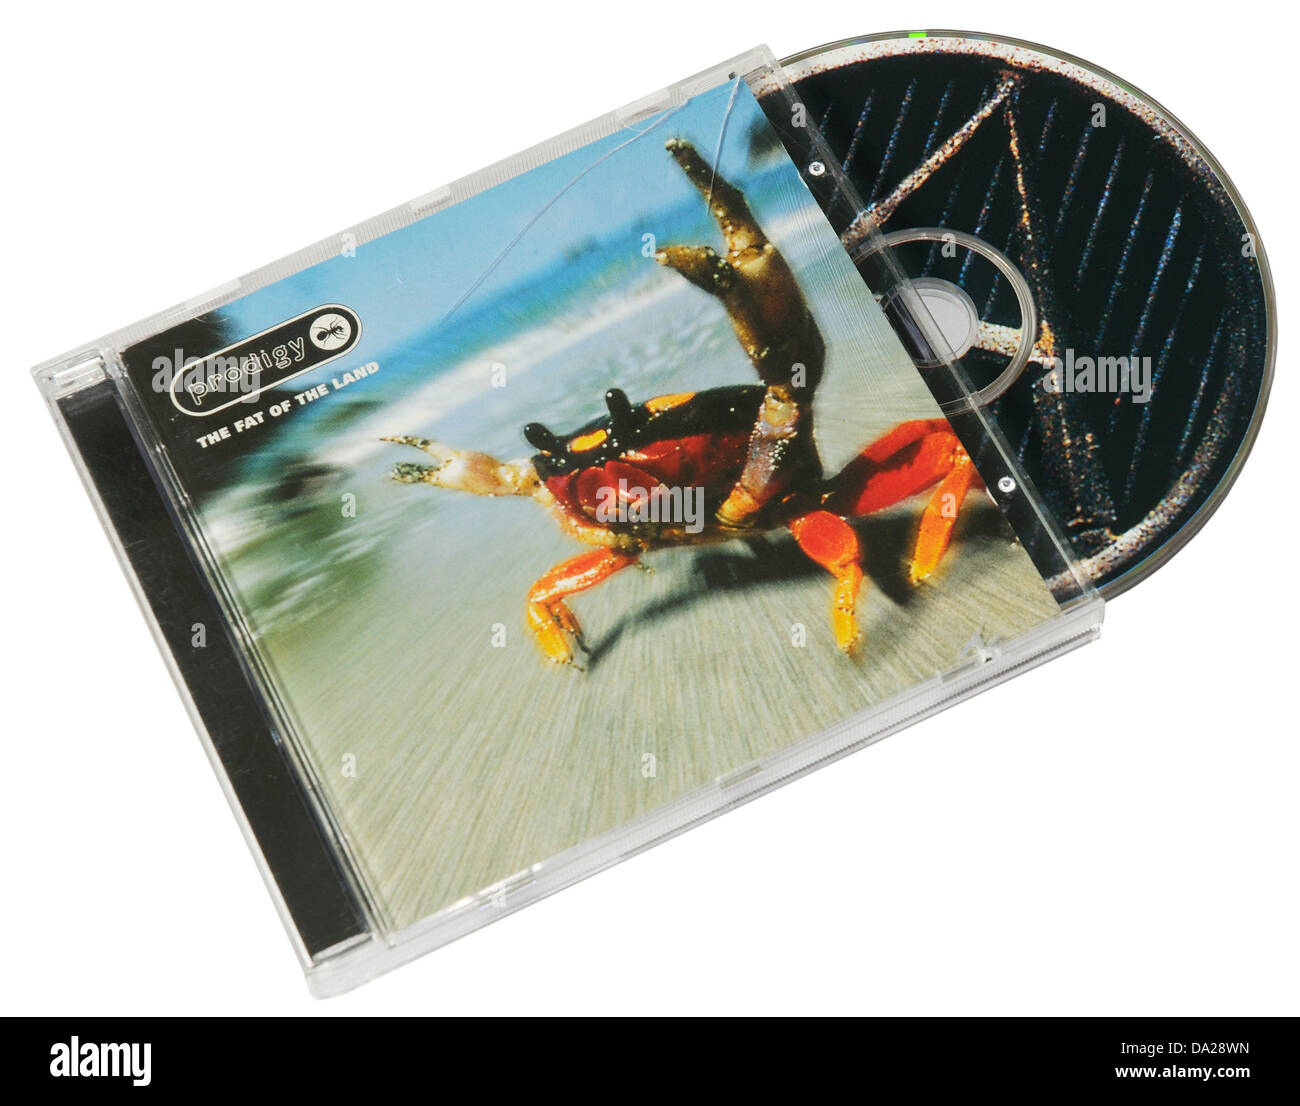 Prodigy The Fat of the Land album on CD Stock Photo